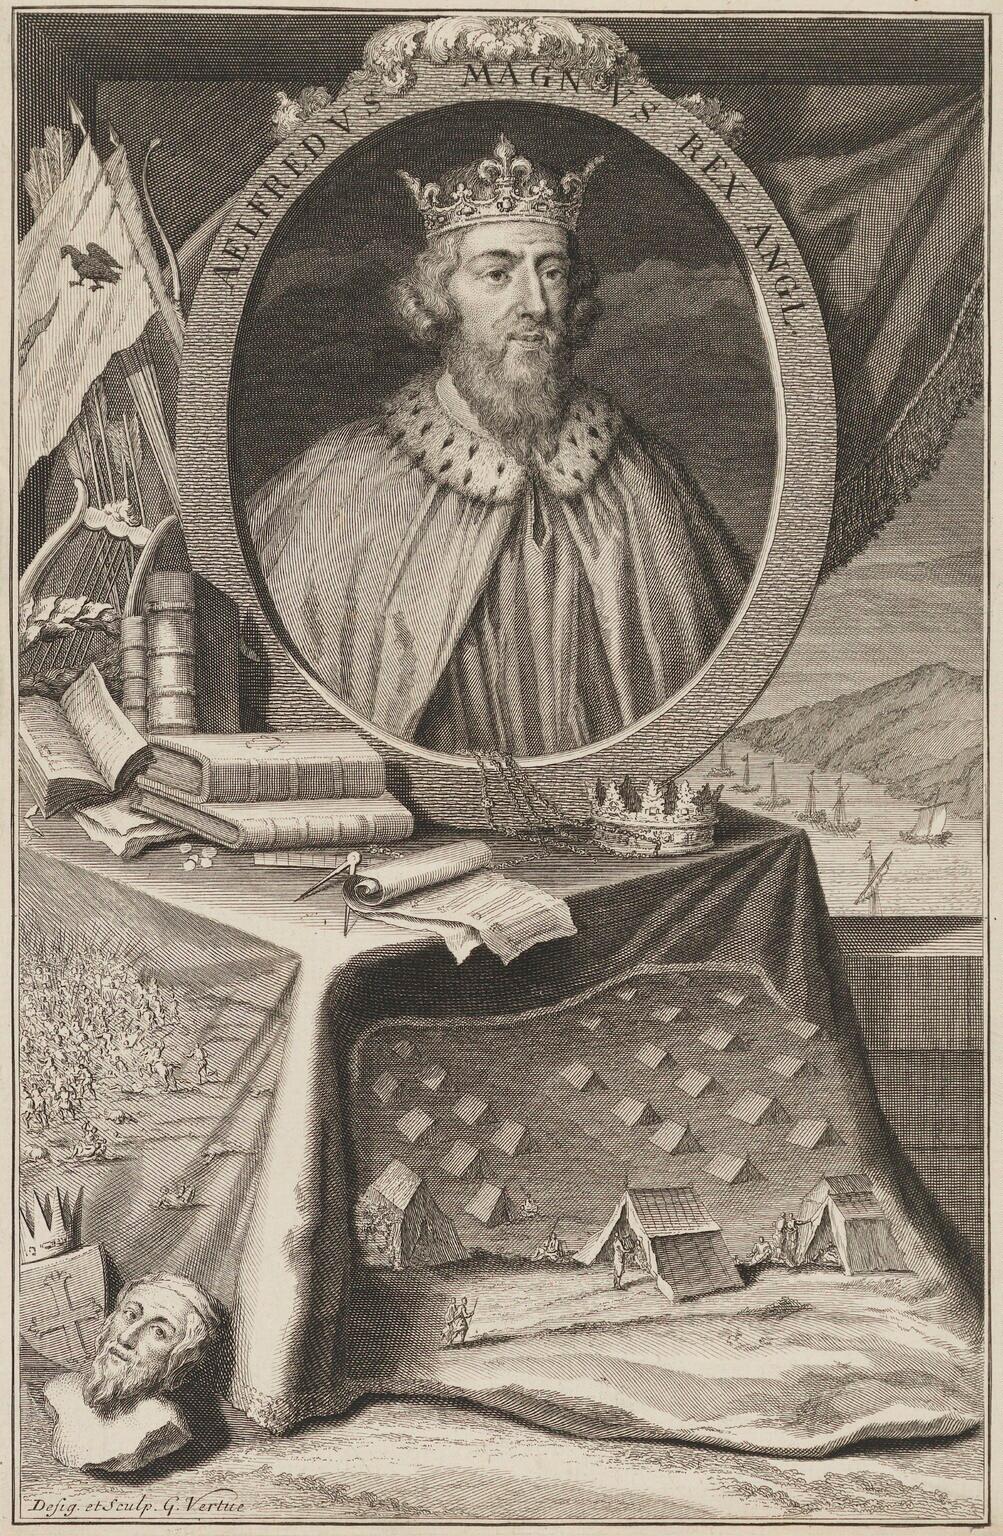 An engraving of Alfred the Great, 1732, by George Vertue for Nicolas Tindal's translation of "Rapin's History of England." Around the portrait are books and documents—symbols of Alfred's literary and legislative works. National Portrait Gallery, London. (Public Domain)